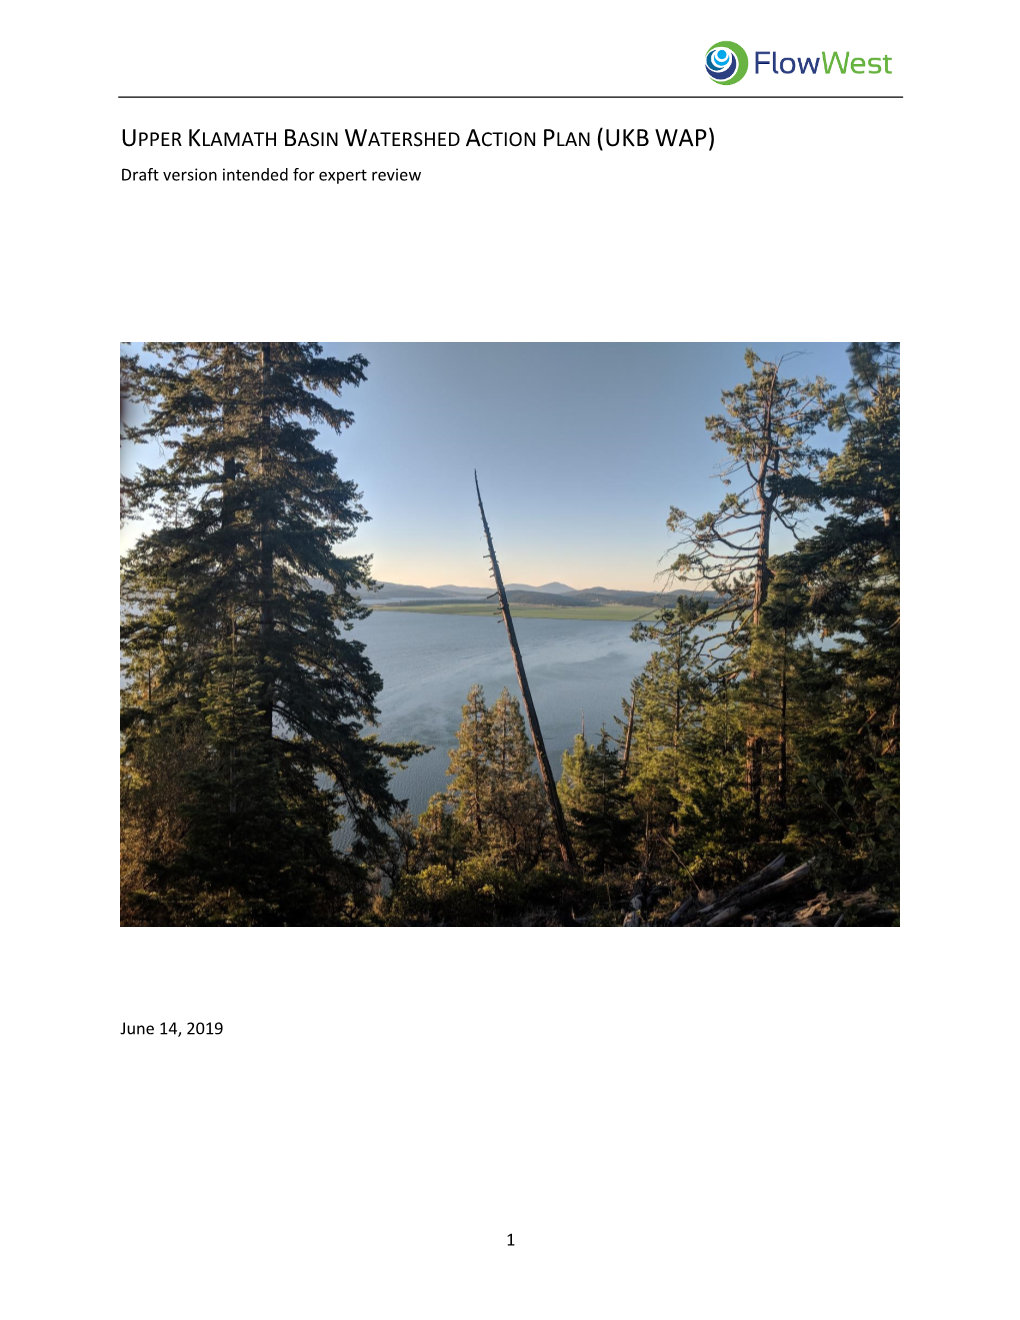 UPPER KLAMATH BASIN WATERSHED ACTION PLAN (UKB WAP) Draft Version Intended for Expert Review